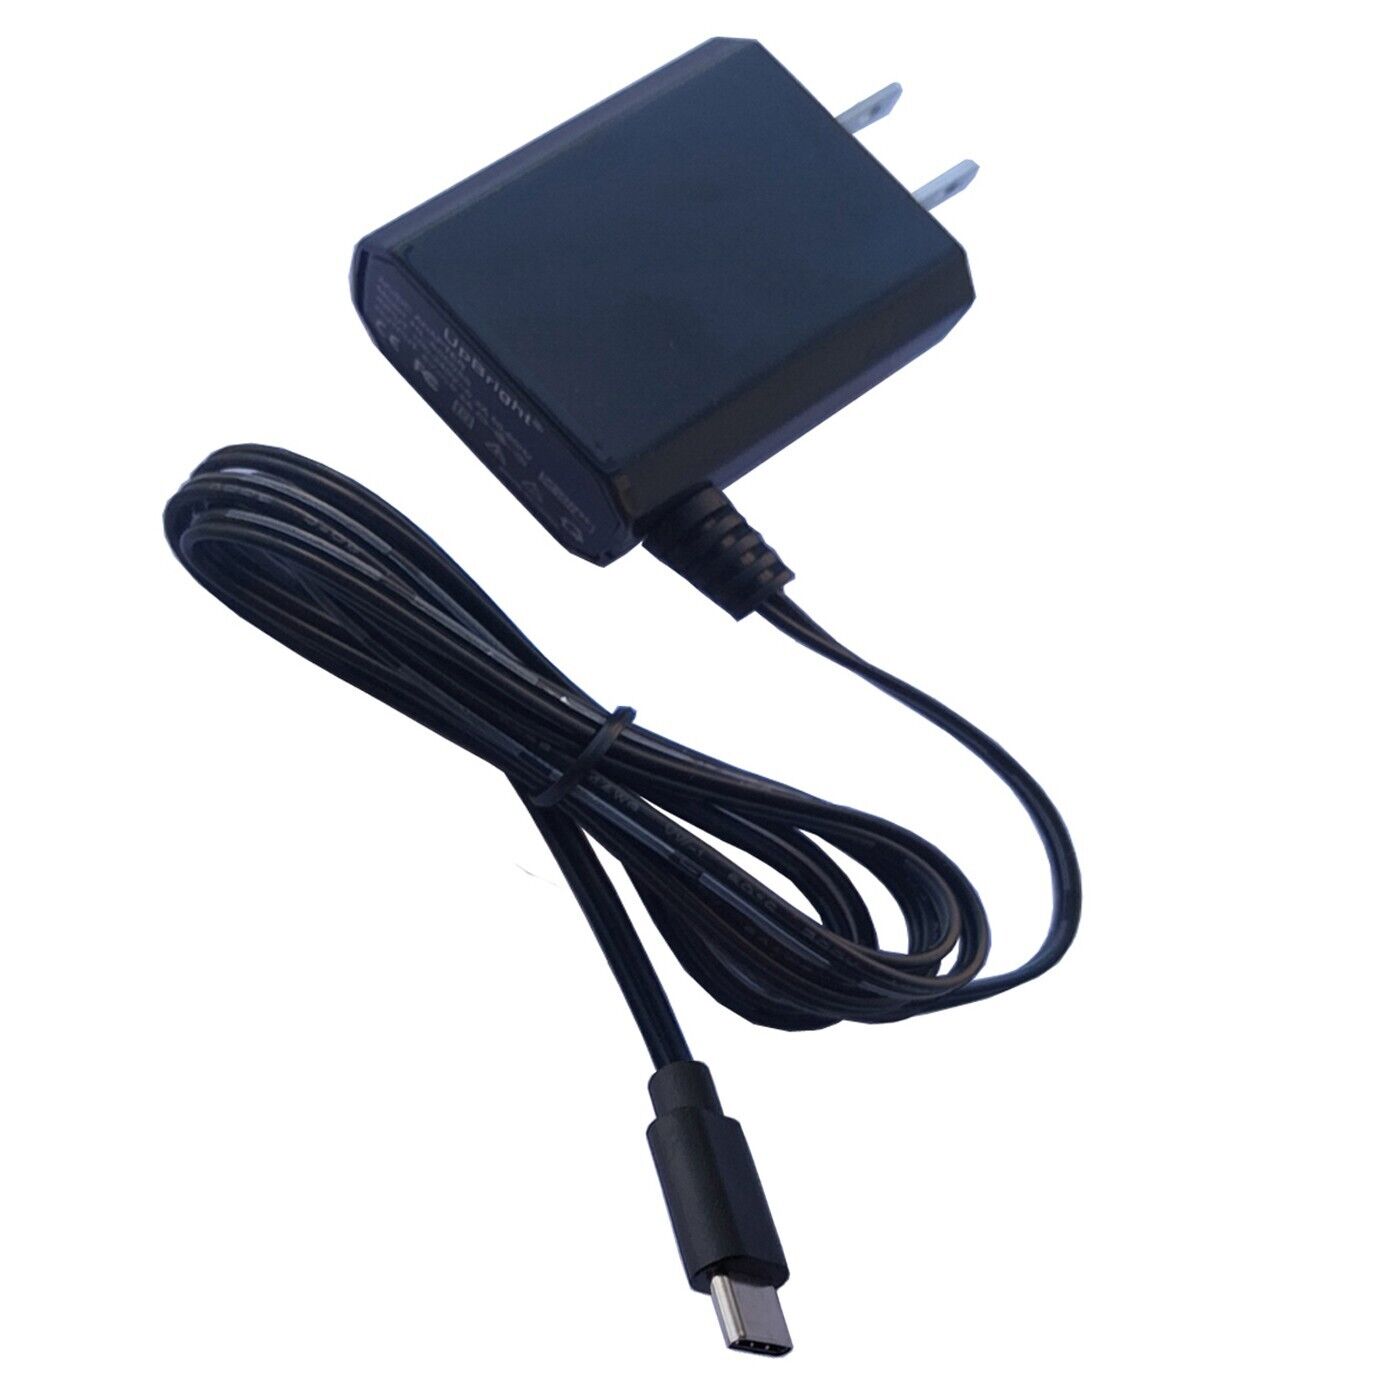 AC/DC Adapter For Kelices MG-008 #53000 001-00 Battery #42000 038-00 Massage Gun